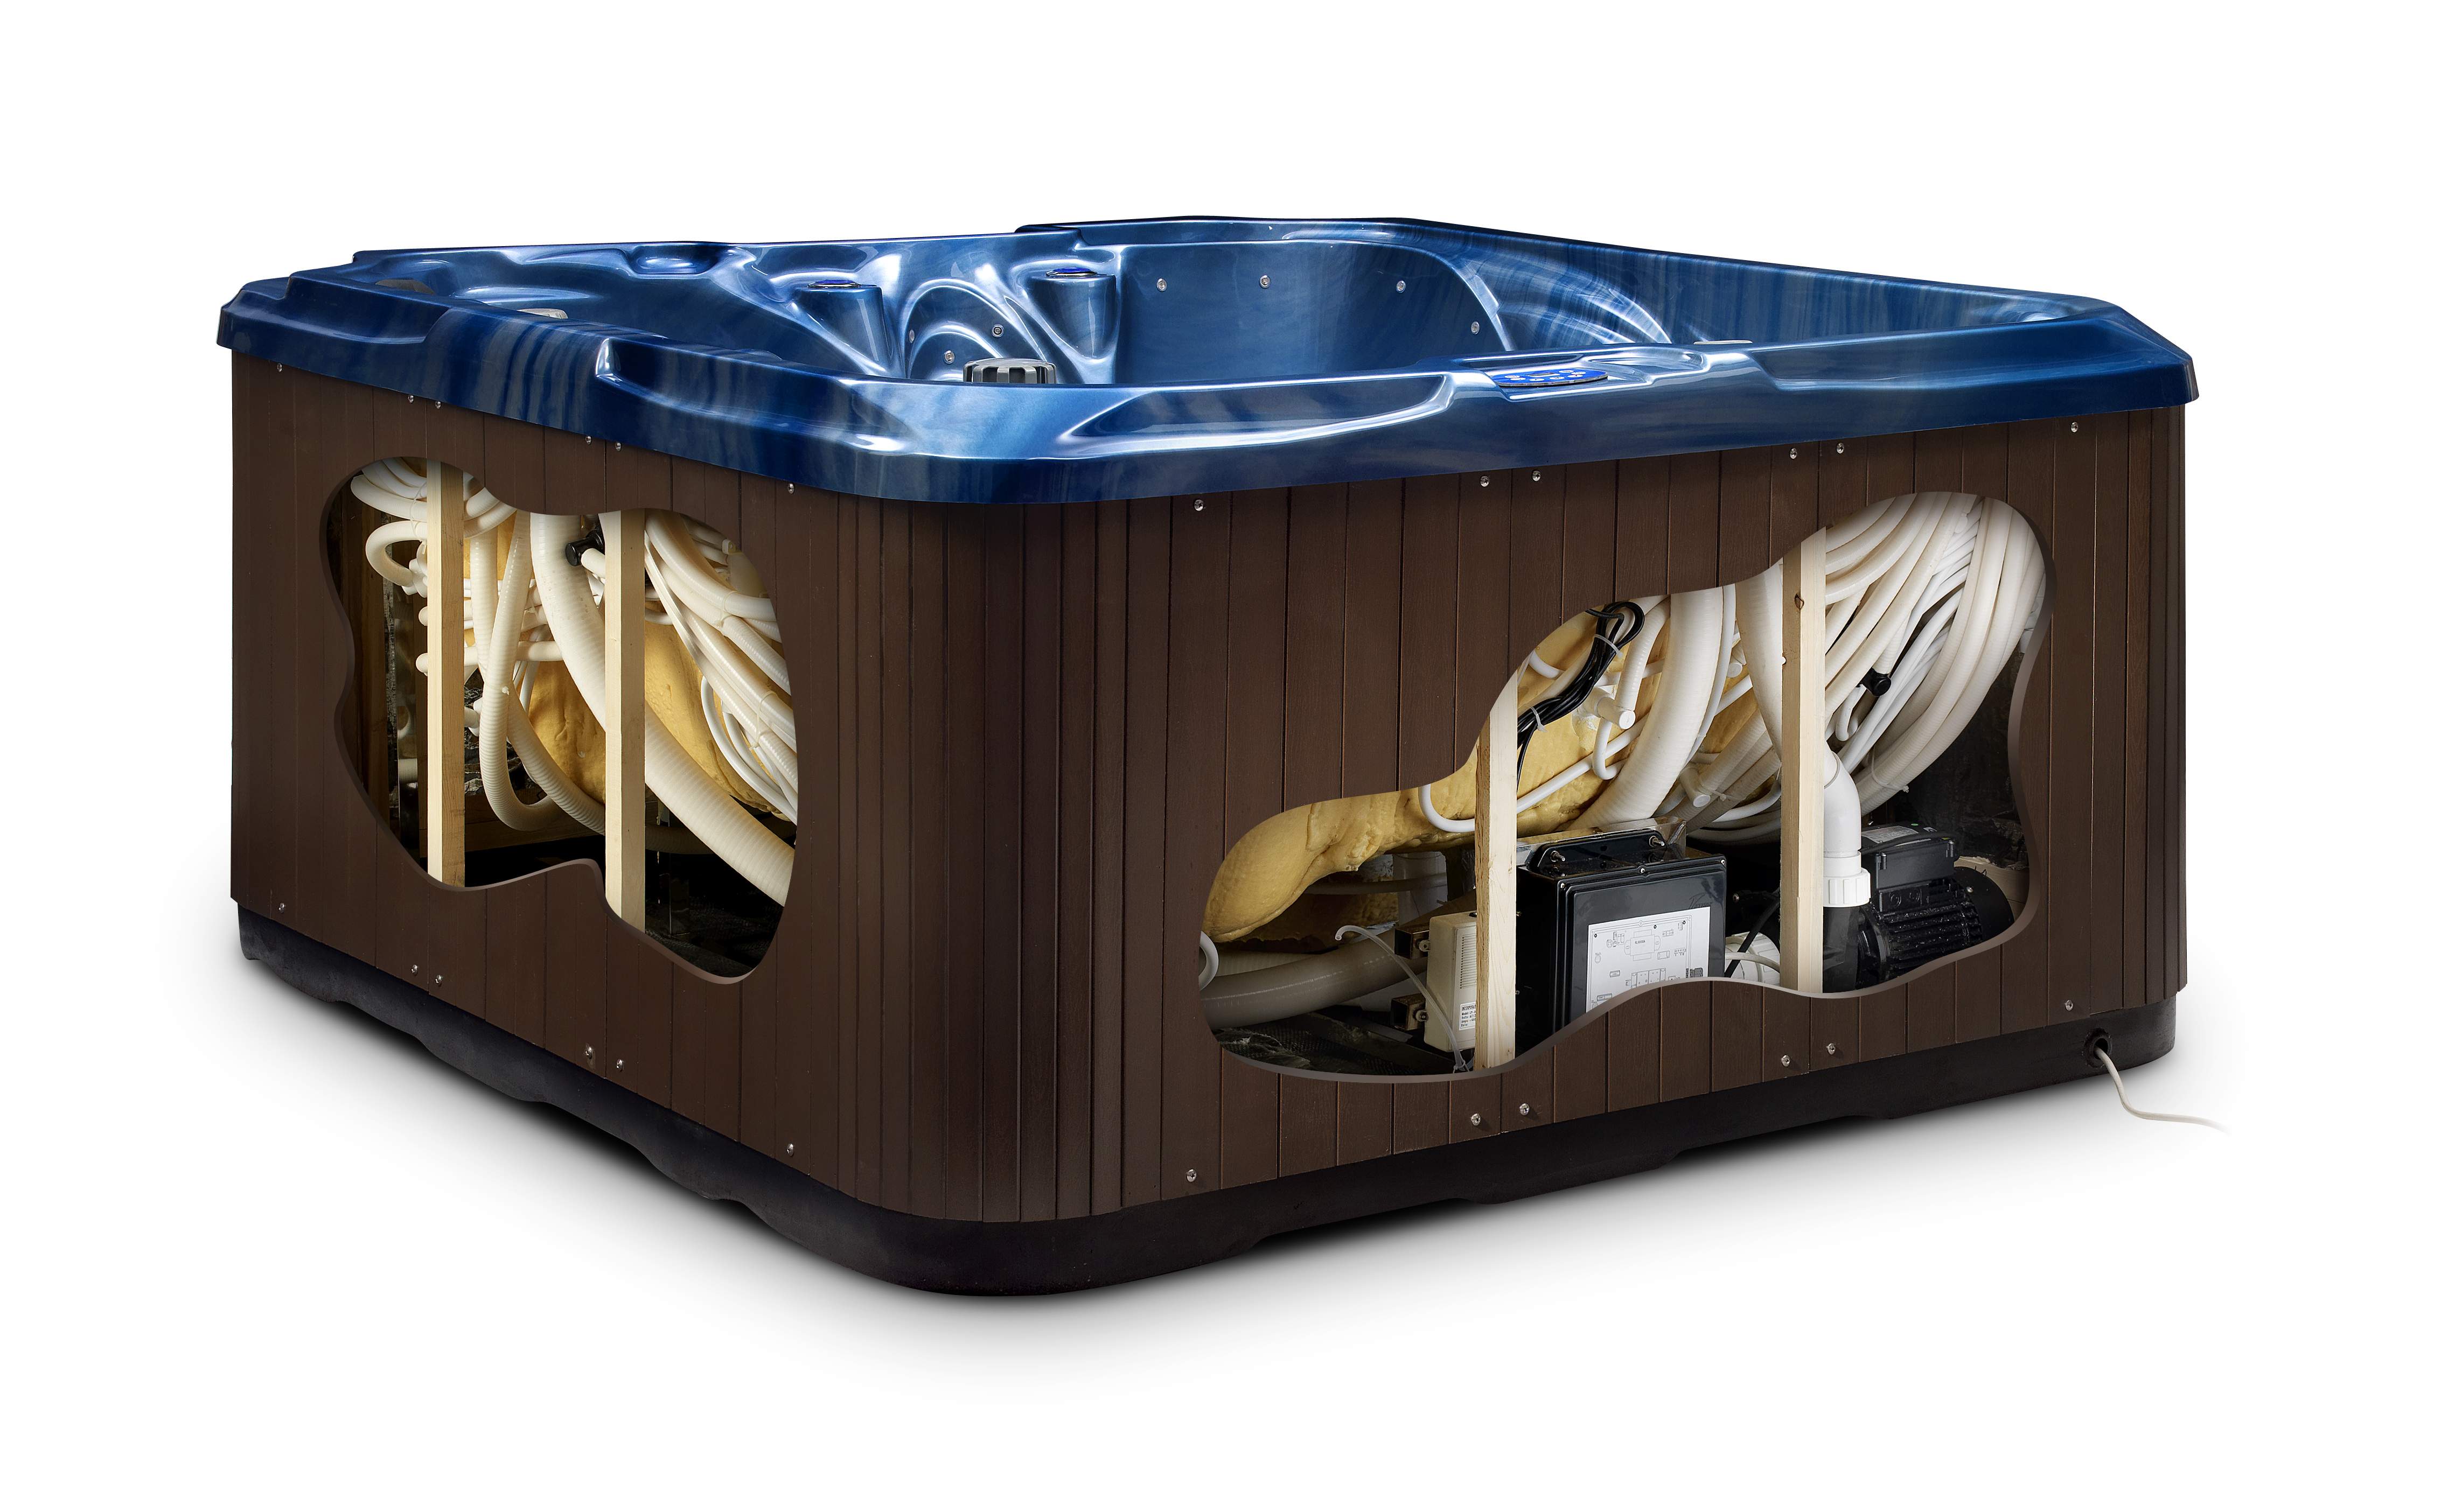 Section of Chinese hot tub - Hot tub repairs Nottinghamshire or Derbyshire